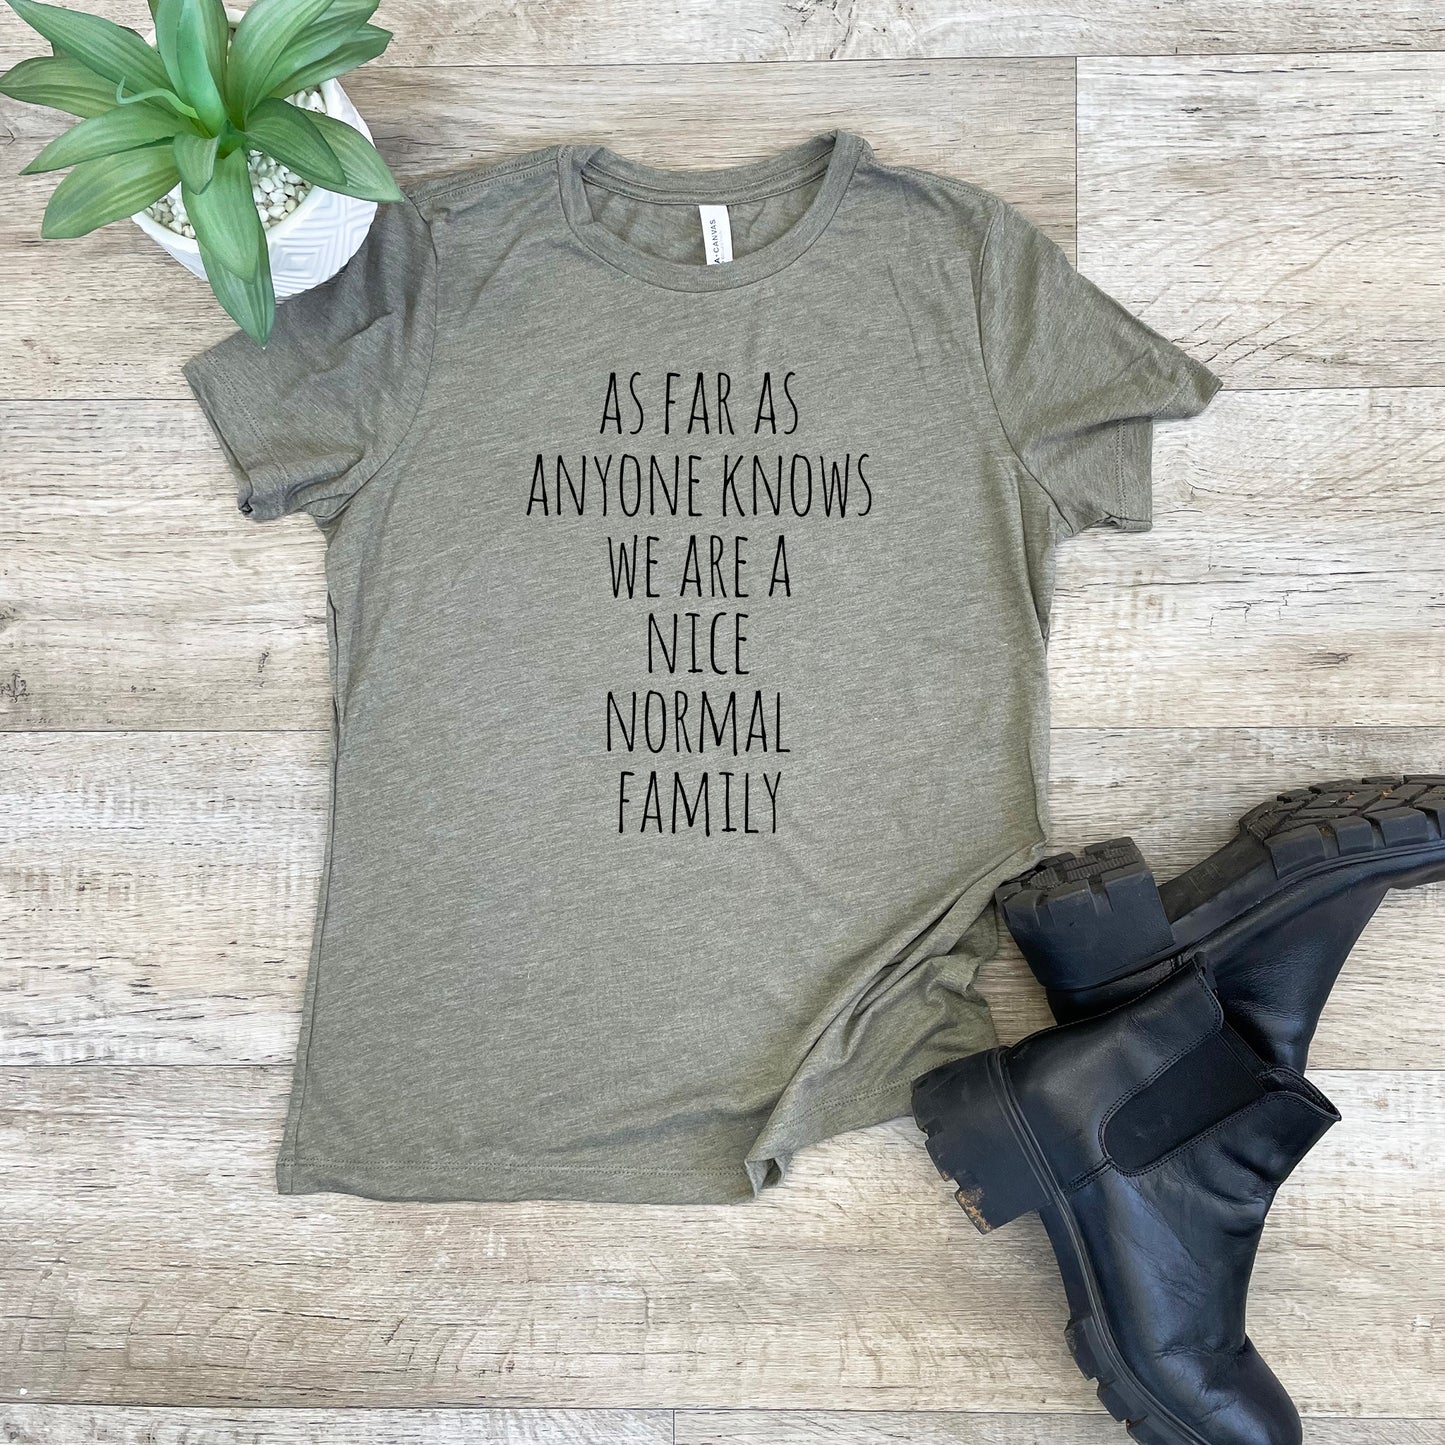 As Far As Anyone Knows We Are A Nice Normal Family - Women's Crew Tee - Olive or Dusty Blue